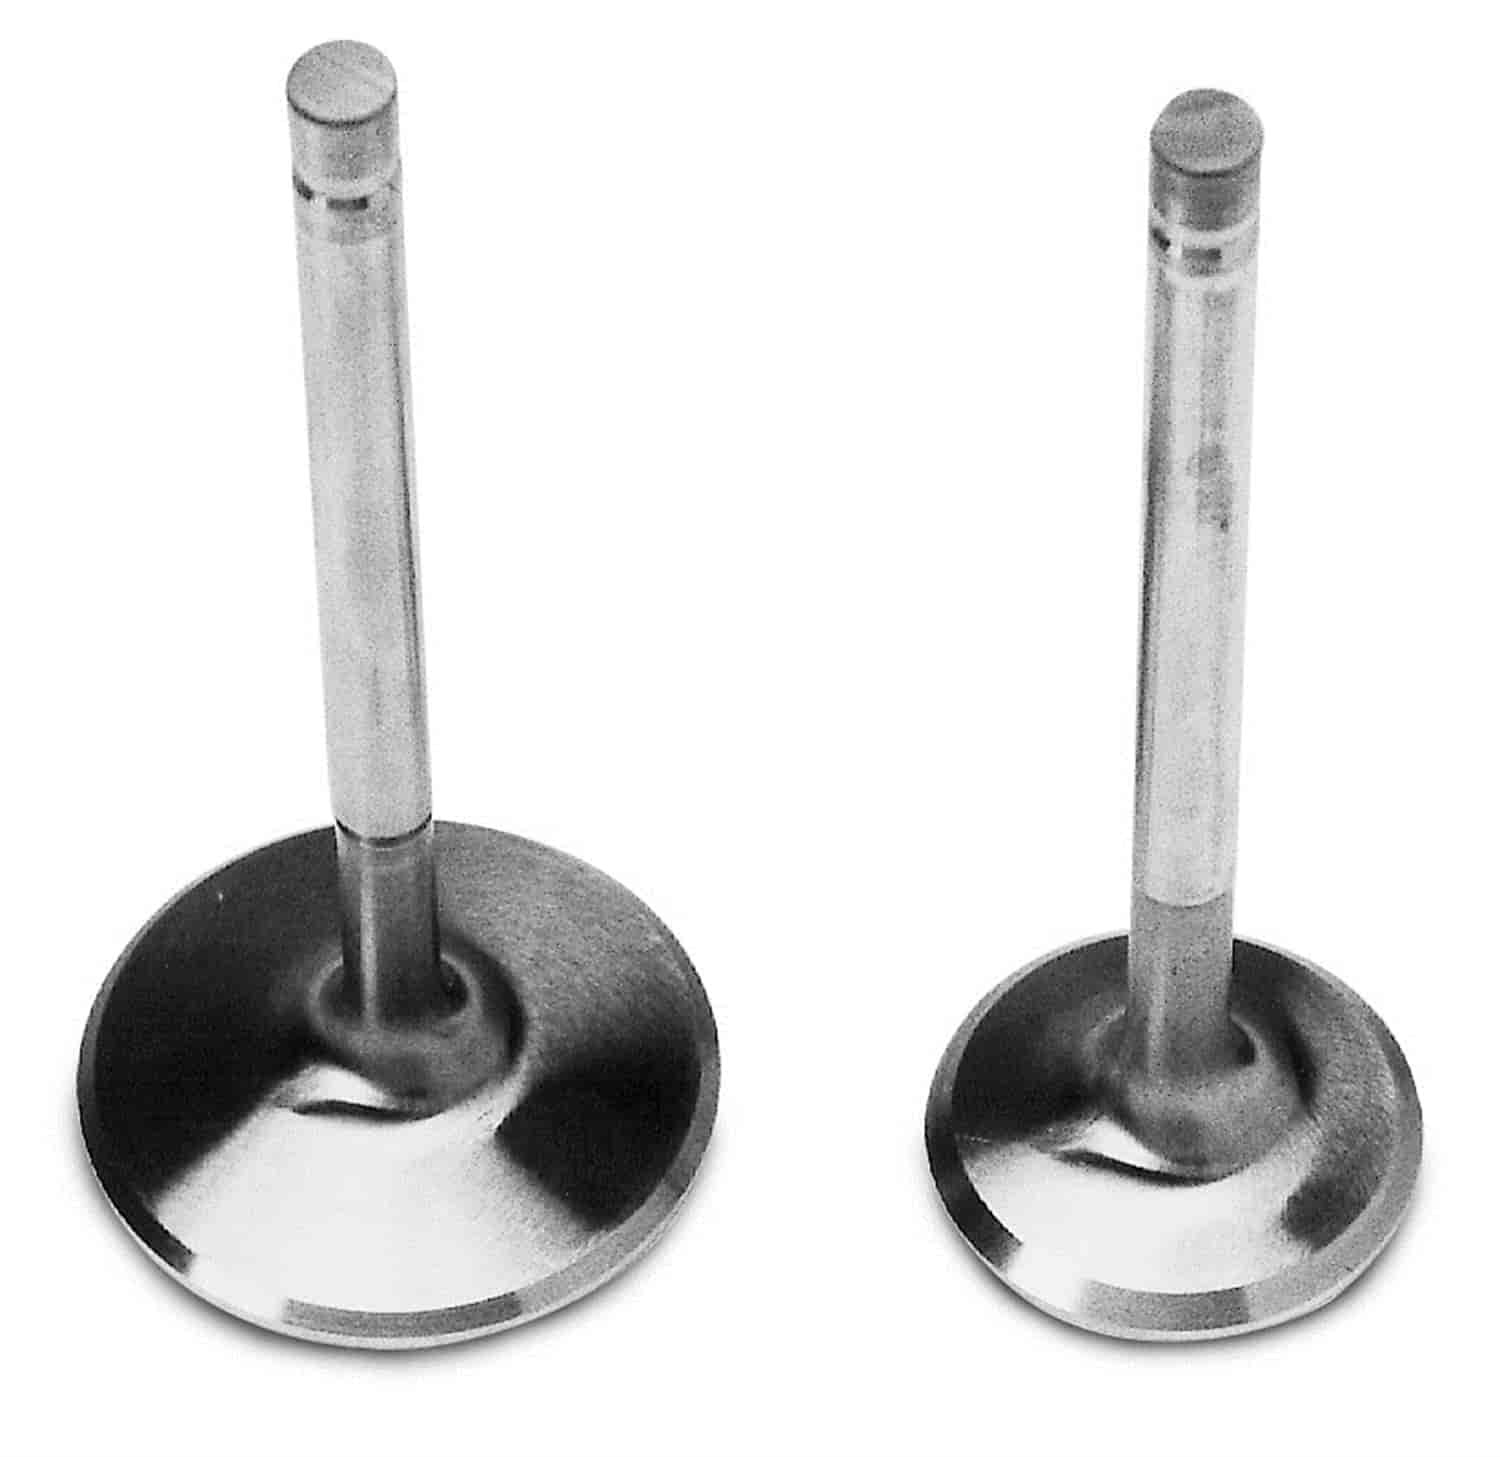 Intake Valve Set 1.90" for Small Block Ford Performer Heads, #350-60379